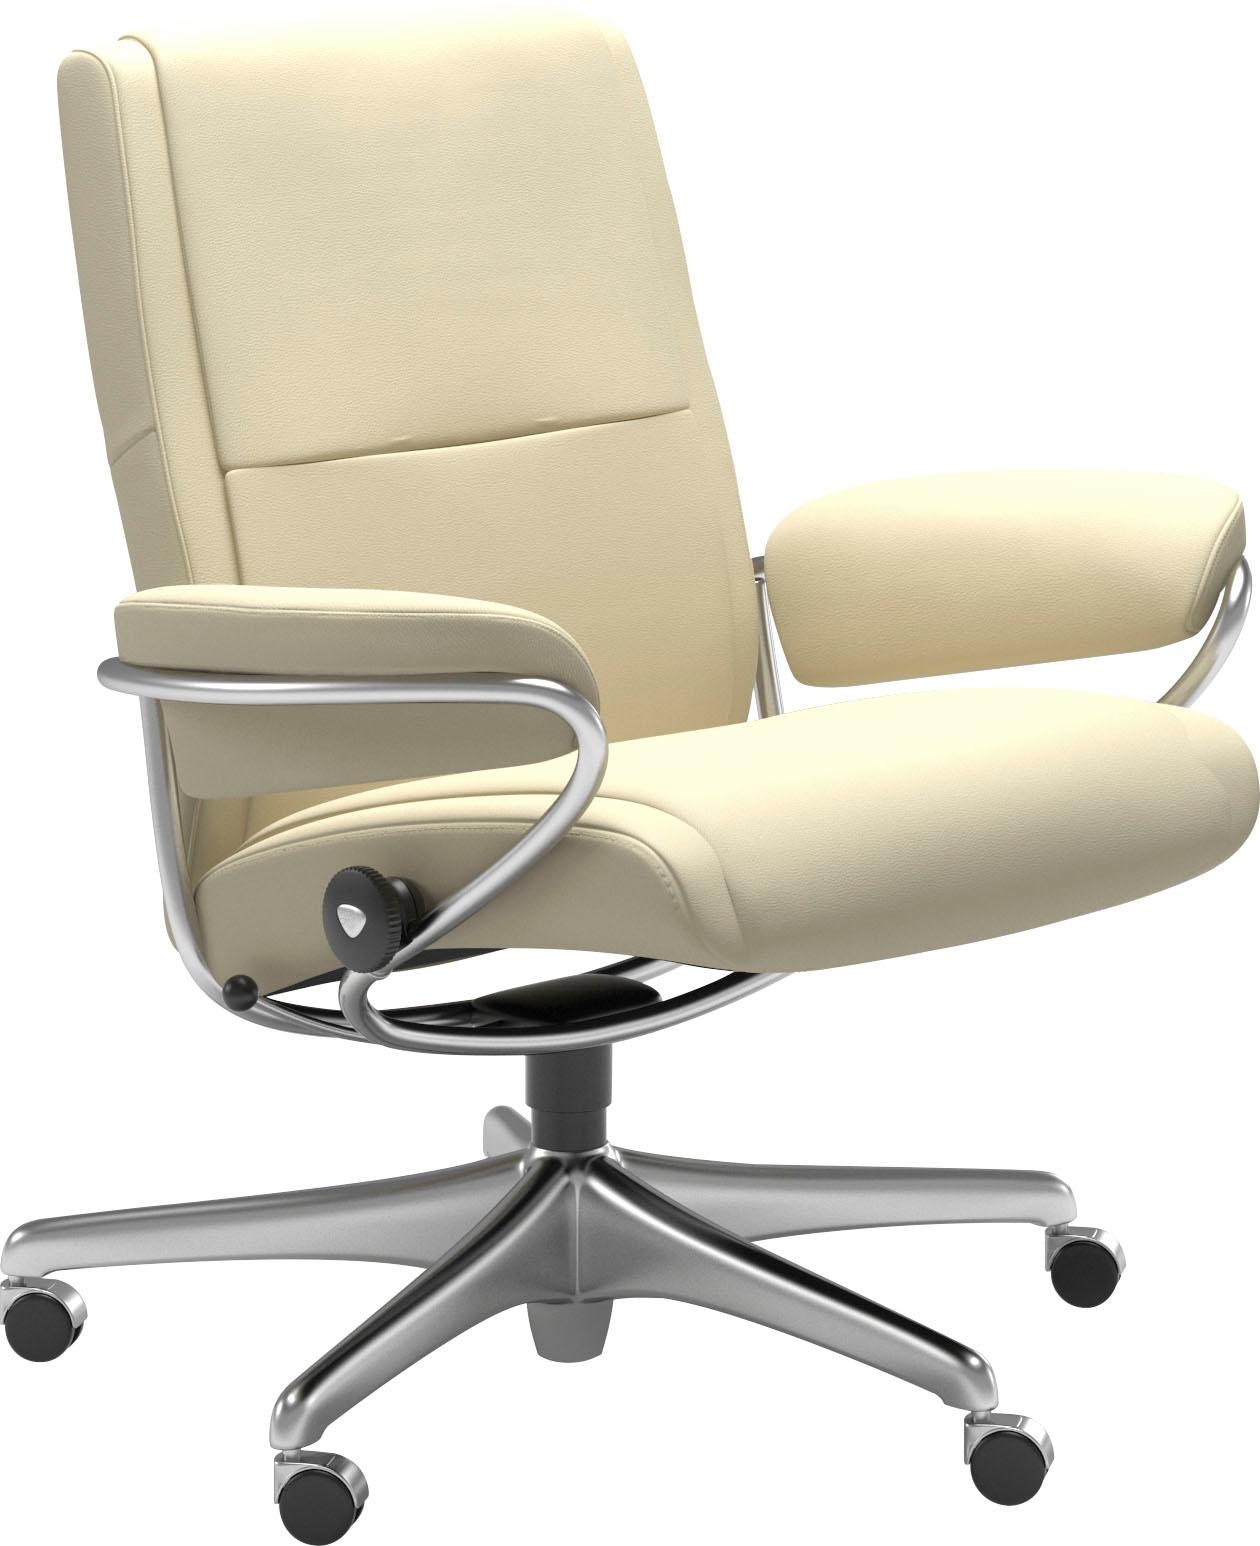 Stressless® Relaxsessel »Paris«, Low Gestell Home kaufen Back, Office Chrom mit Base, BAUR 